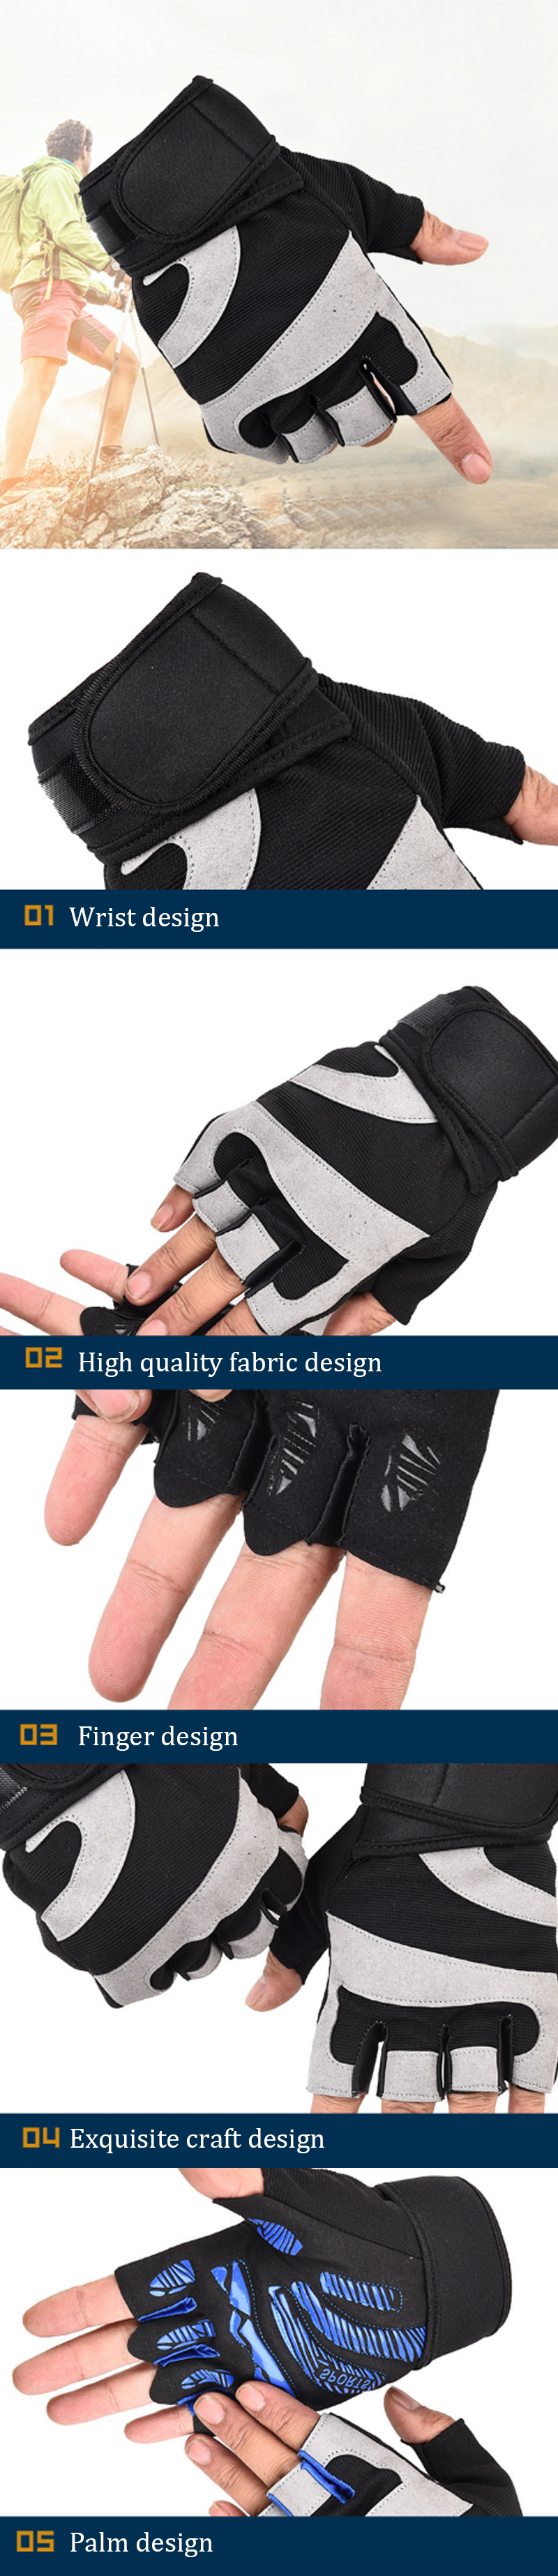 1Pair-KALOAD-Tactical-Glove-Cycling-Half-Finger-Unisex-Gloves-Silicone-Anti-slip-Breathable-Fitness--1462916-1